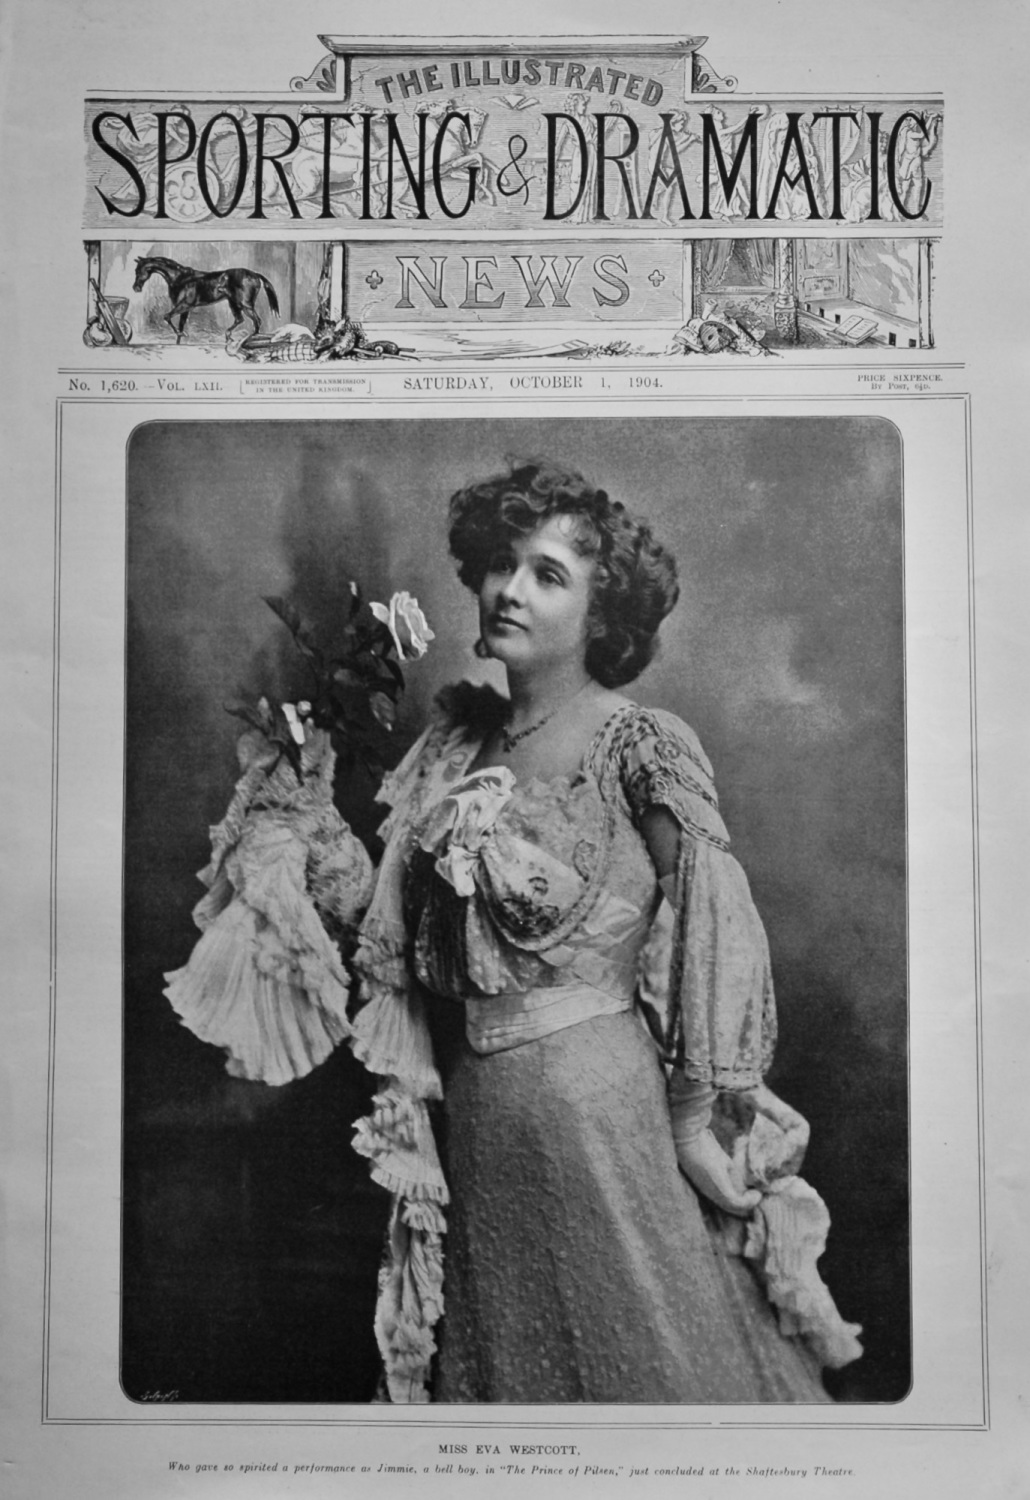 Illustrated Sporting and Dramatic News, October 1st, 1904.